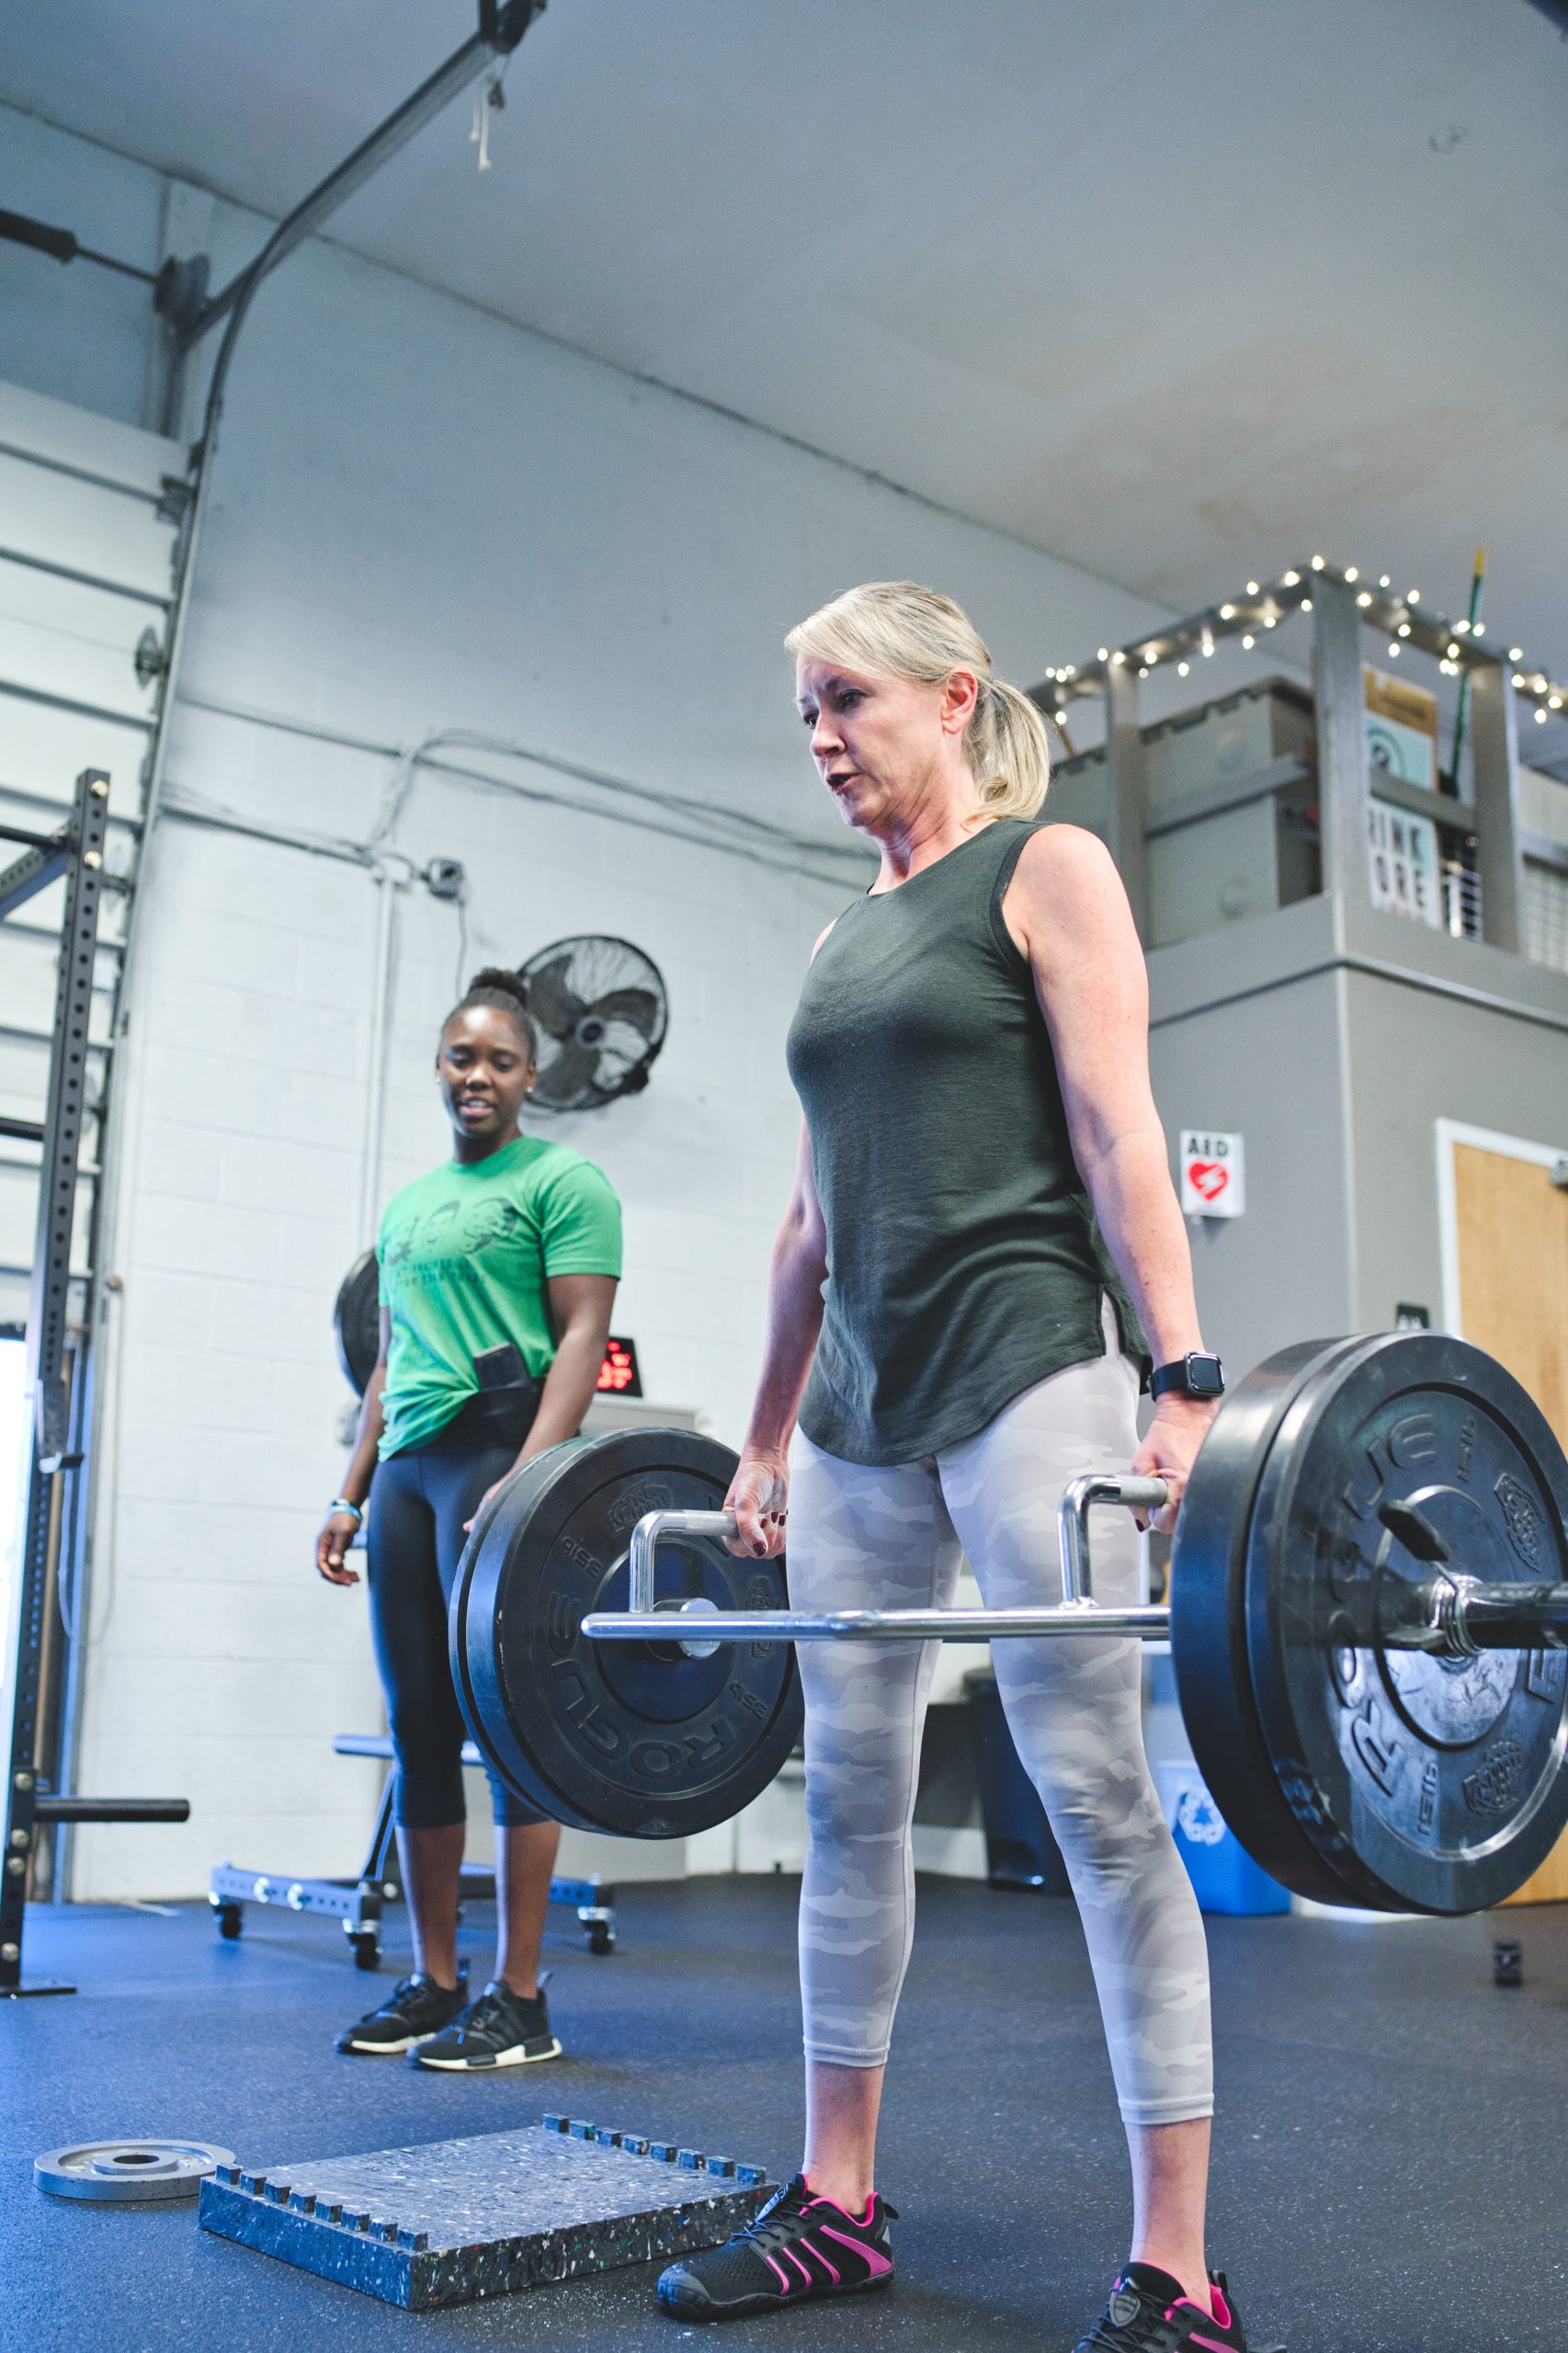 A woman deadlifting in a gym